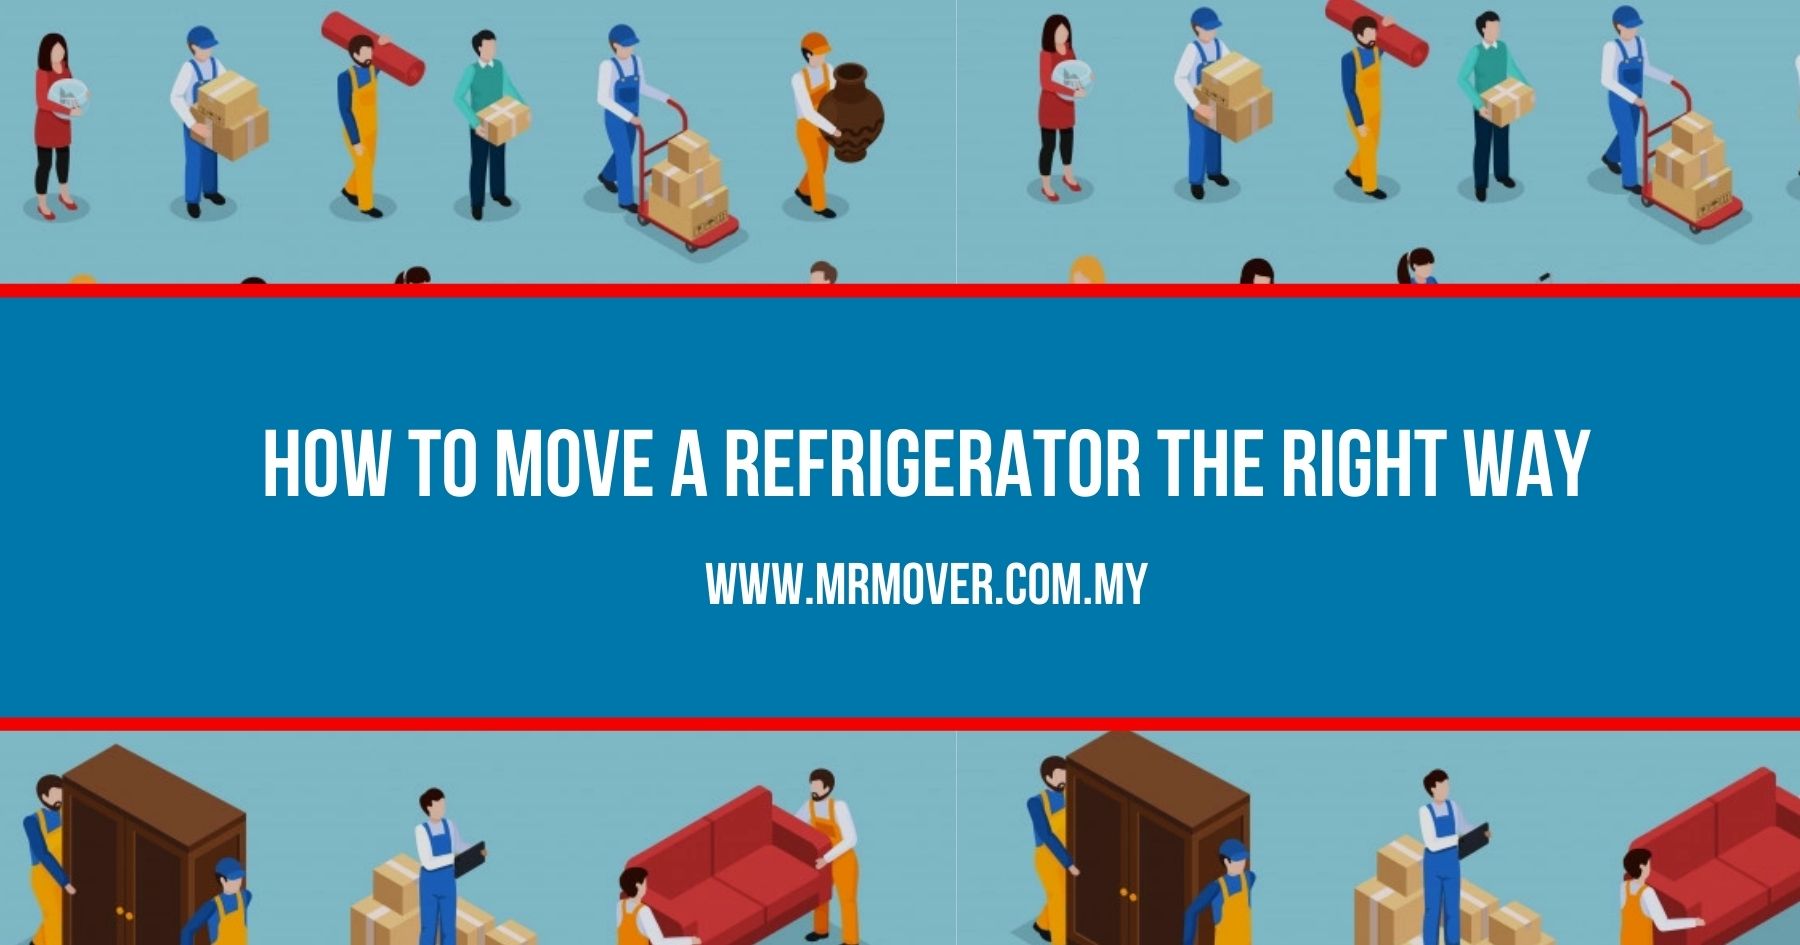 How to Move a Refrigerator the Right Way